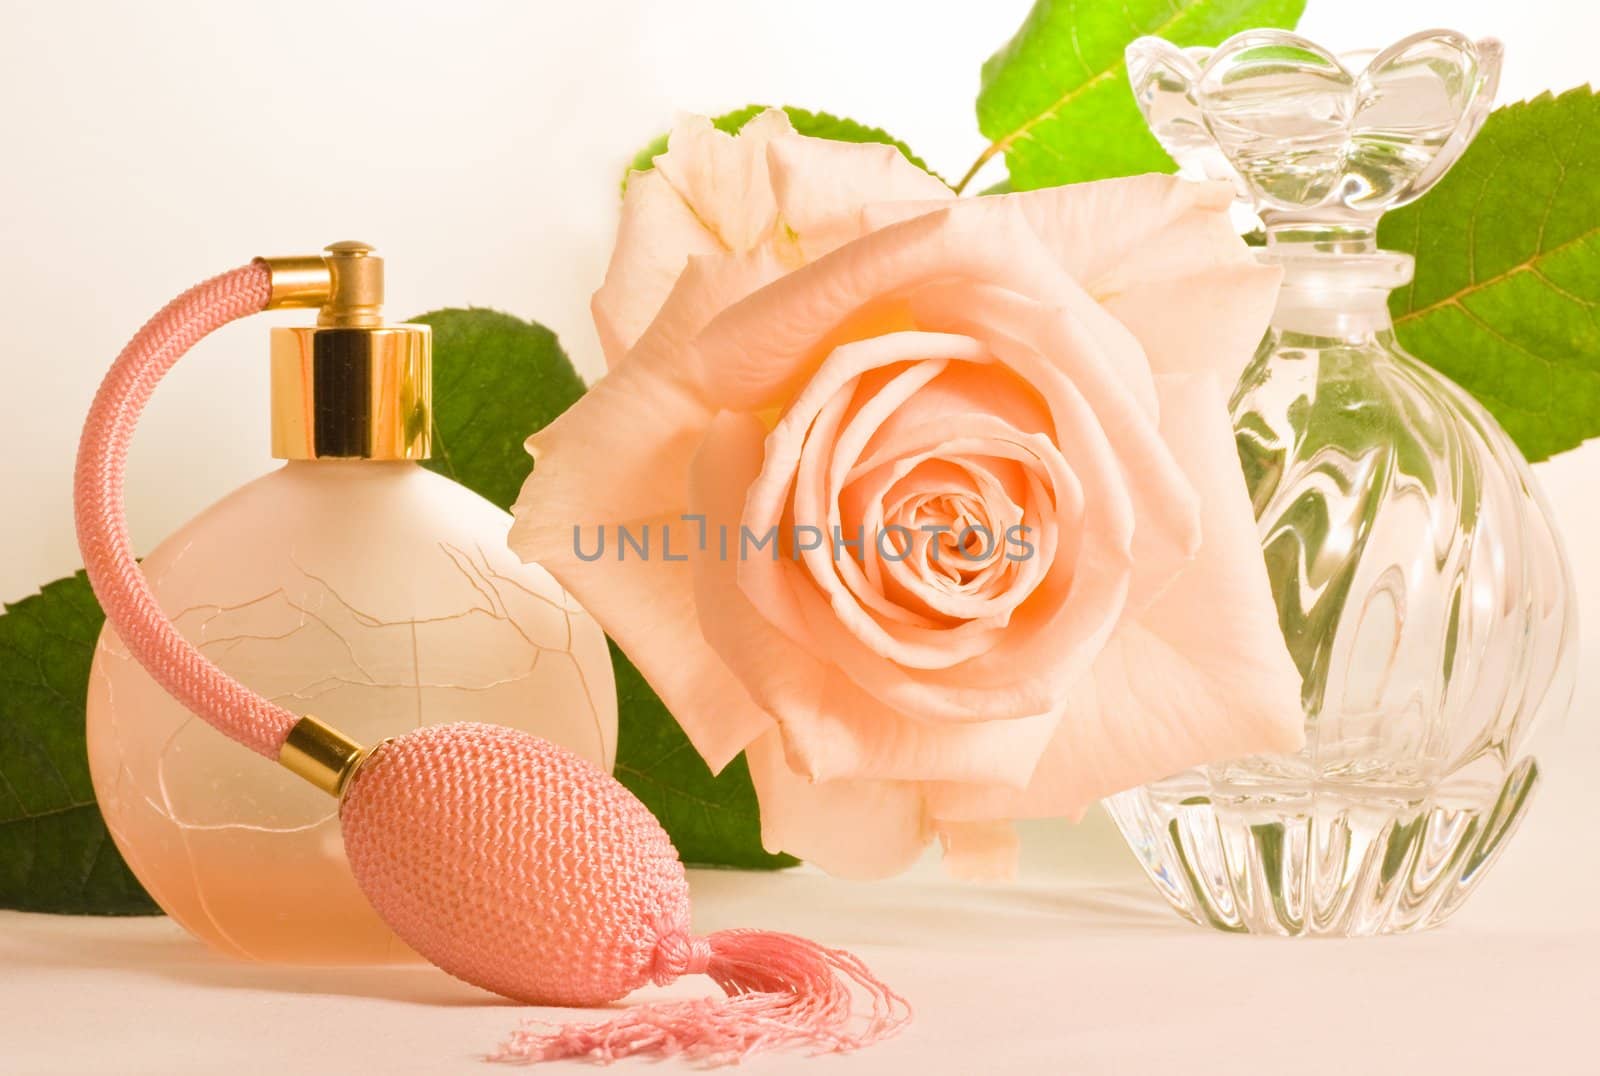 Soft pink rose with green leaves and two small bottles